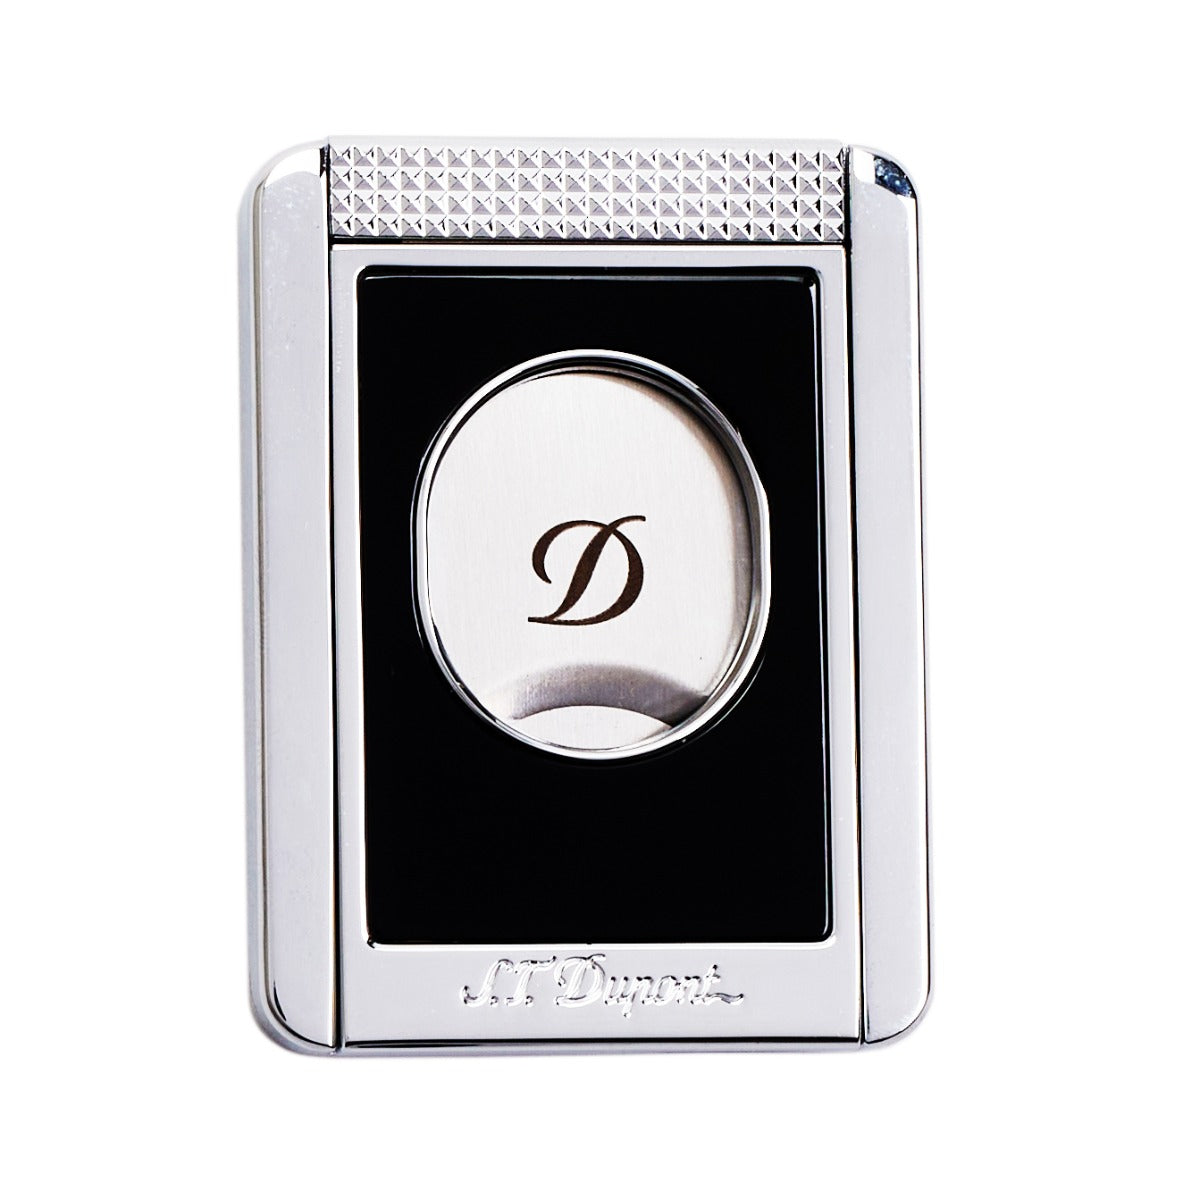 An S.T. Dupont Black & Chrome Cigar Cutter Stand with a lacquer finish and the letter d on it.